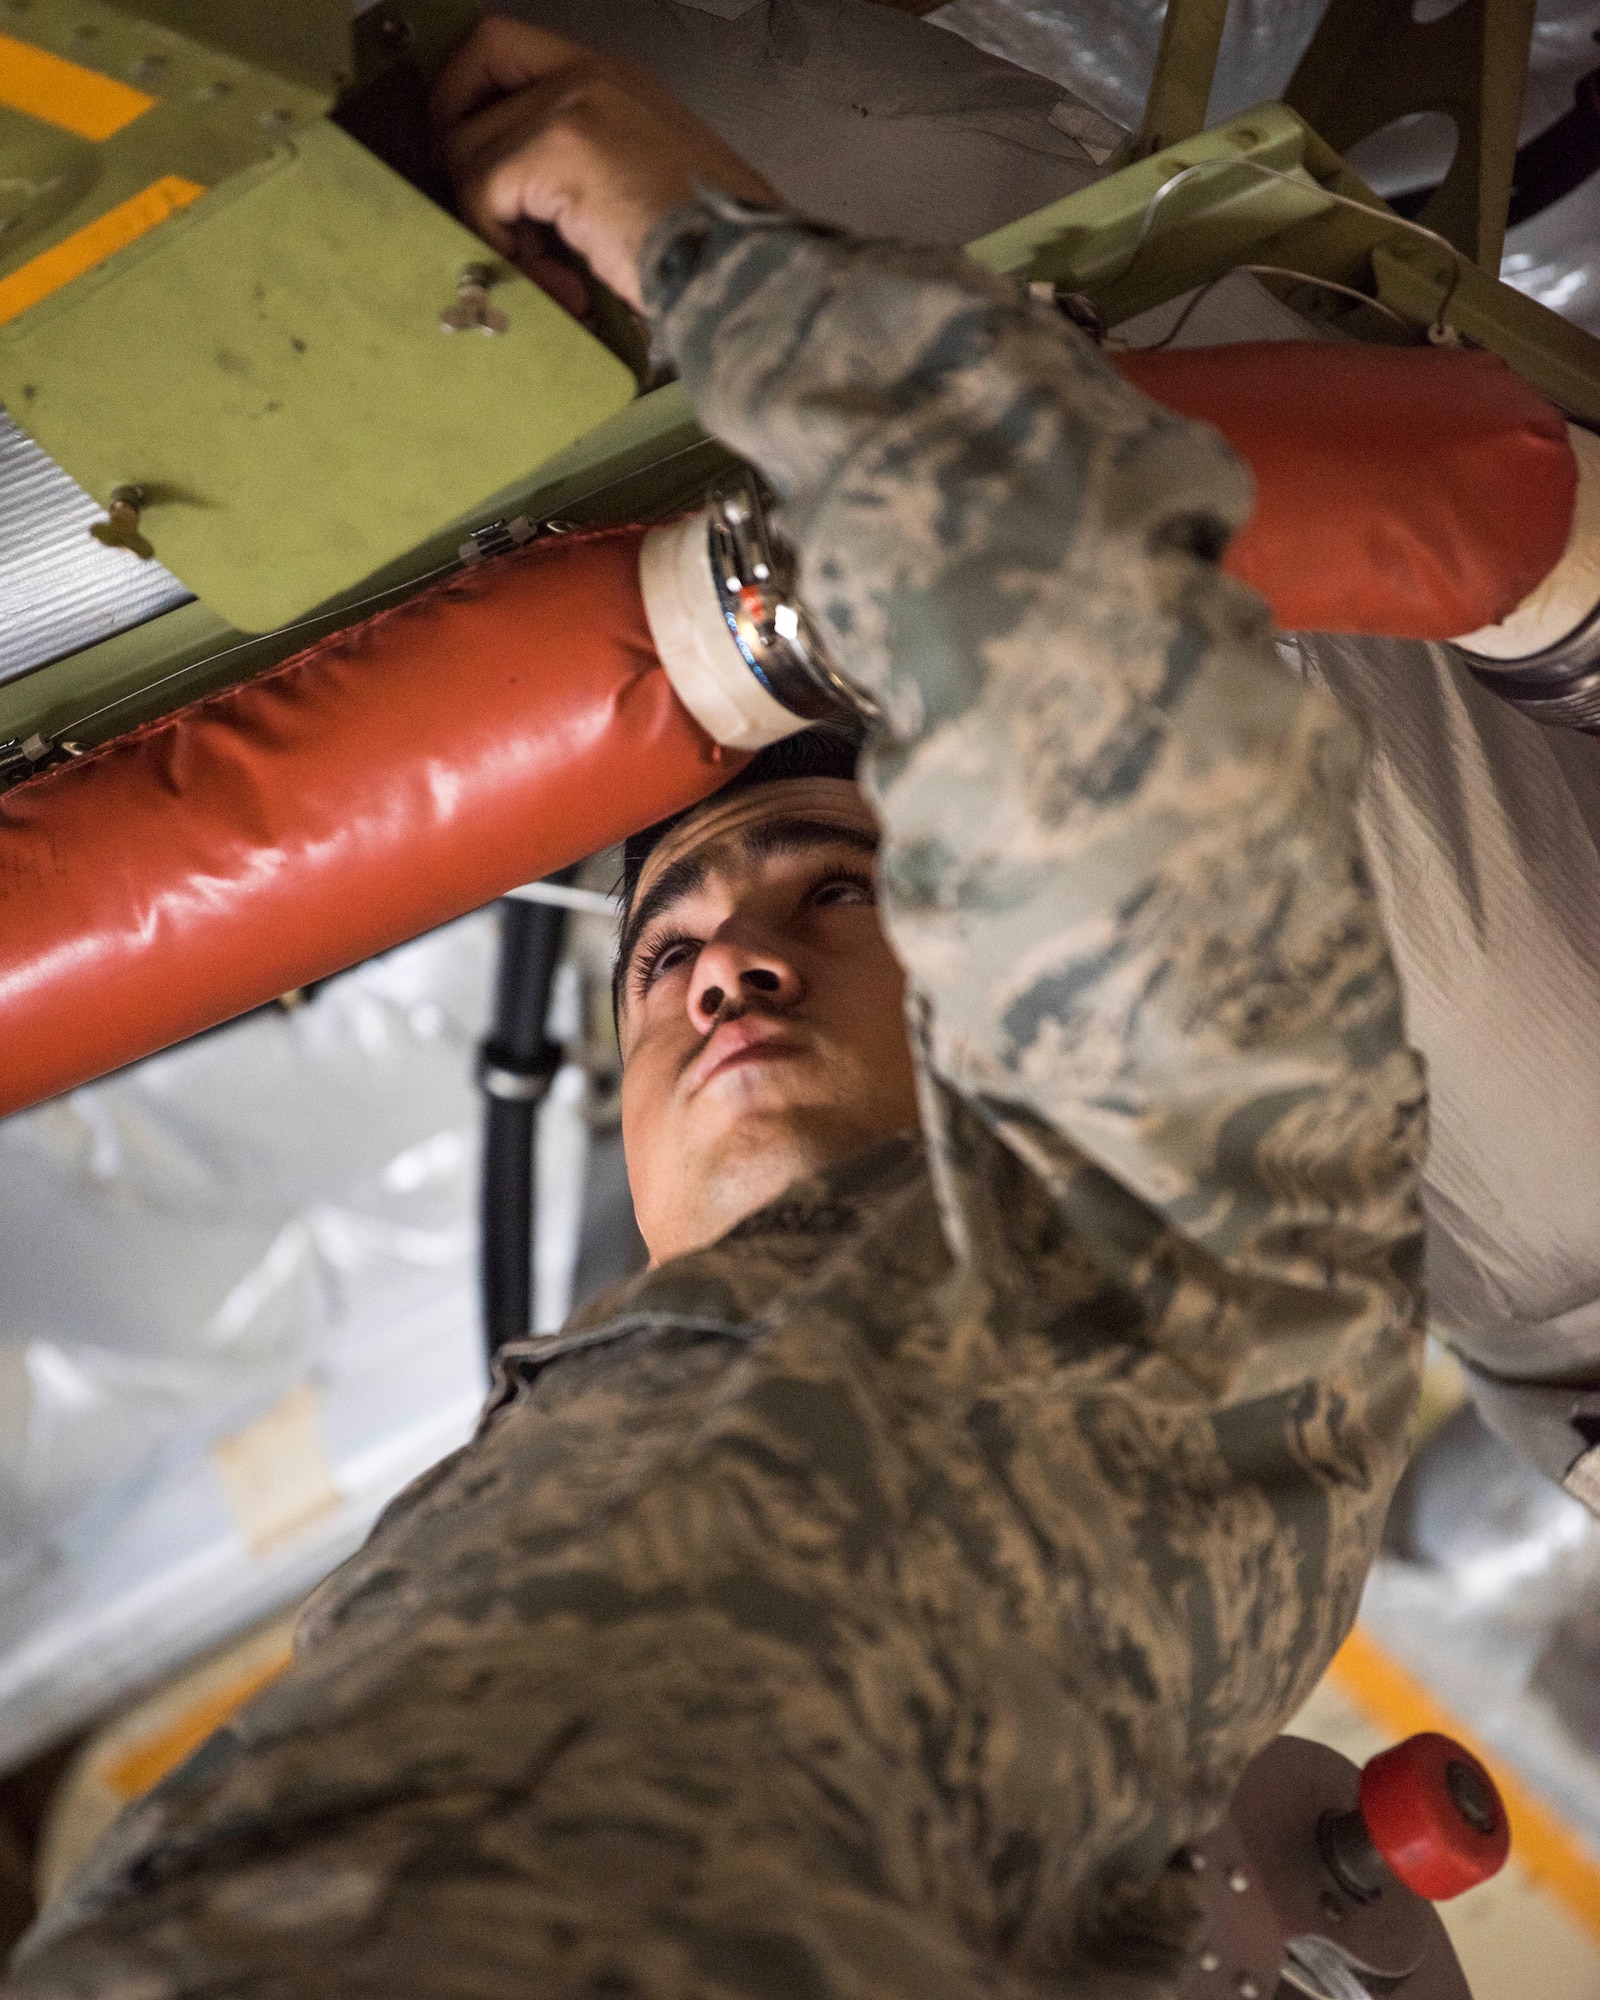 U.S. Air Force Staff Sgt. Caleb Langel, a 517th Aircraft Maintenance Unit C-17 Globemaster III dedicated crew chief, inspects a life raft pressure gauge at Joint Base Elmendorf-Richardson, Alaska, July 26, 2018. Langel is responsible for service and repairs on everything coming back from daily inspections, including making sure the life raft pressure gauge meets specifications to fully inflate if needed.